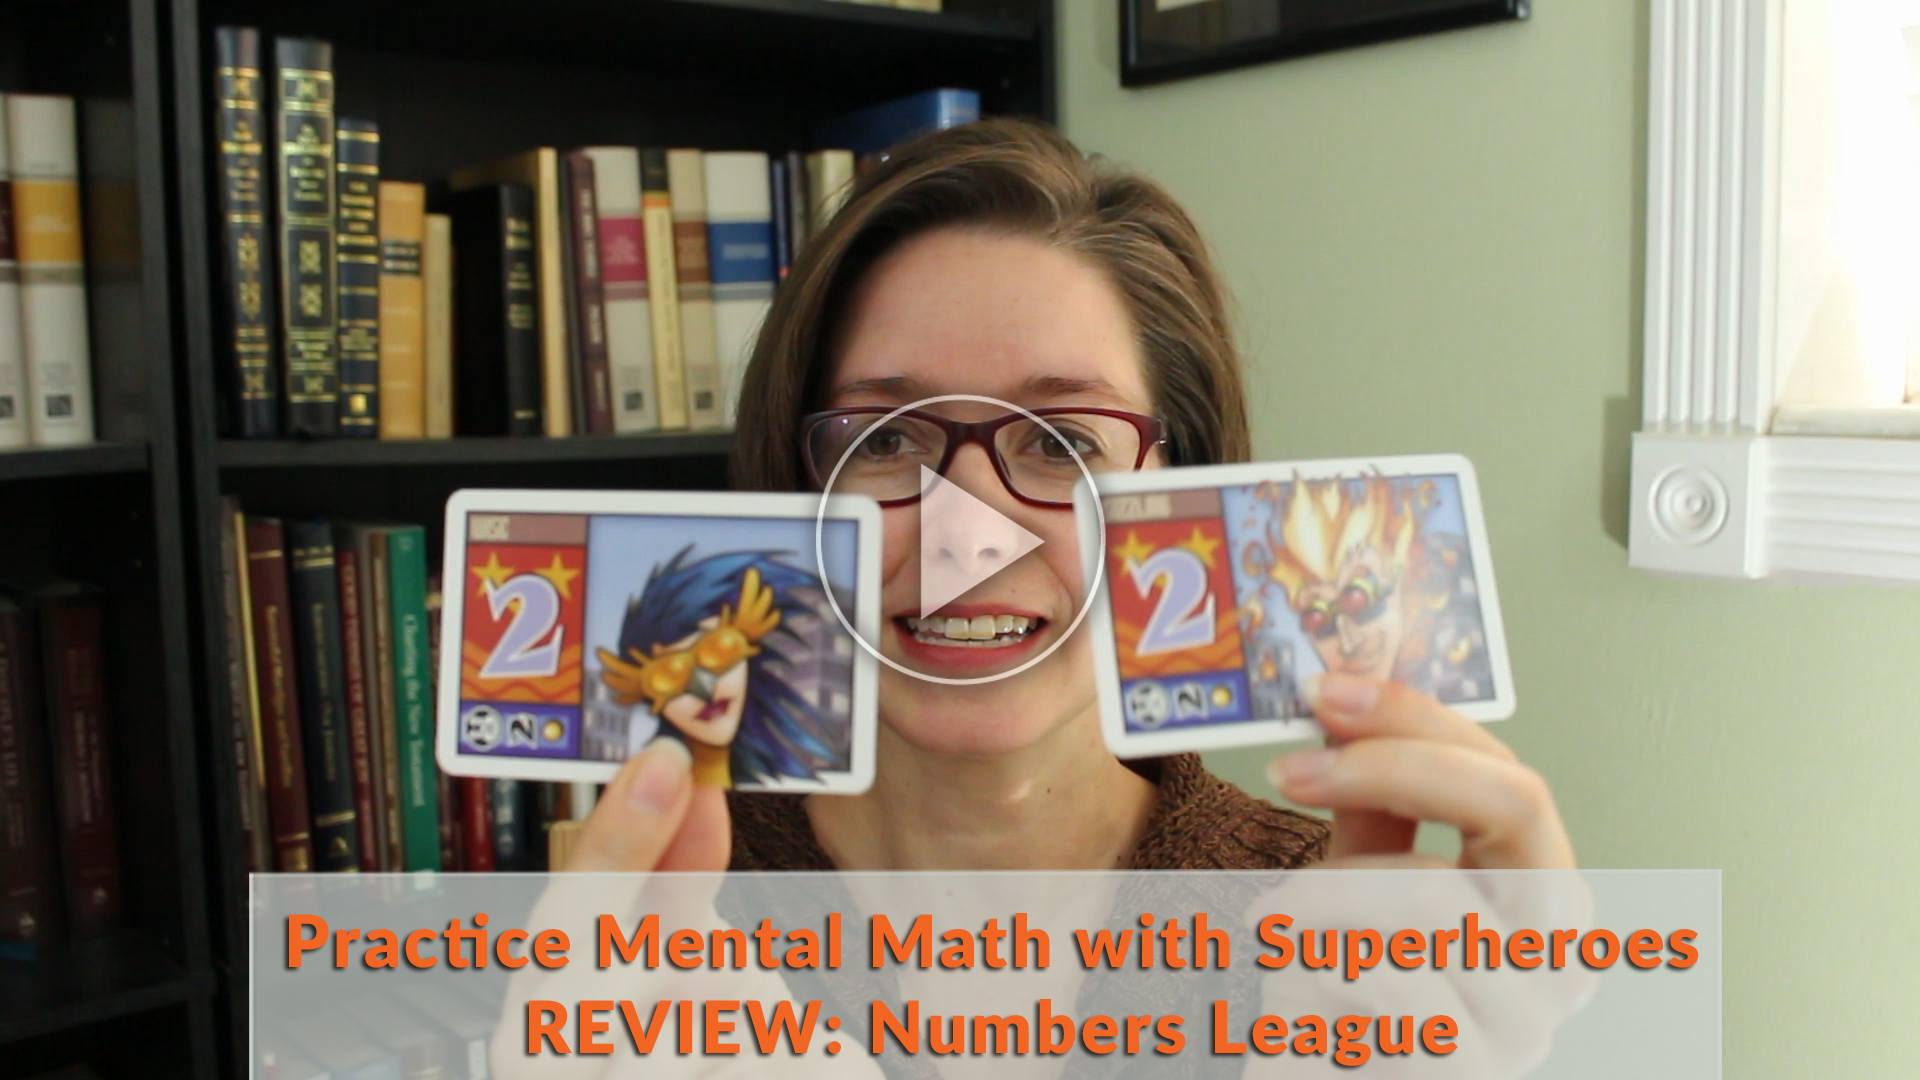 Number league math game review